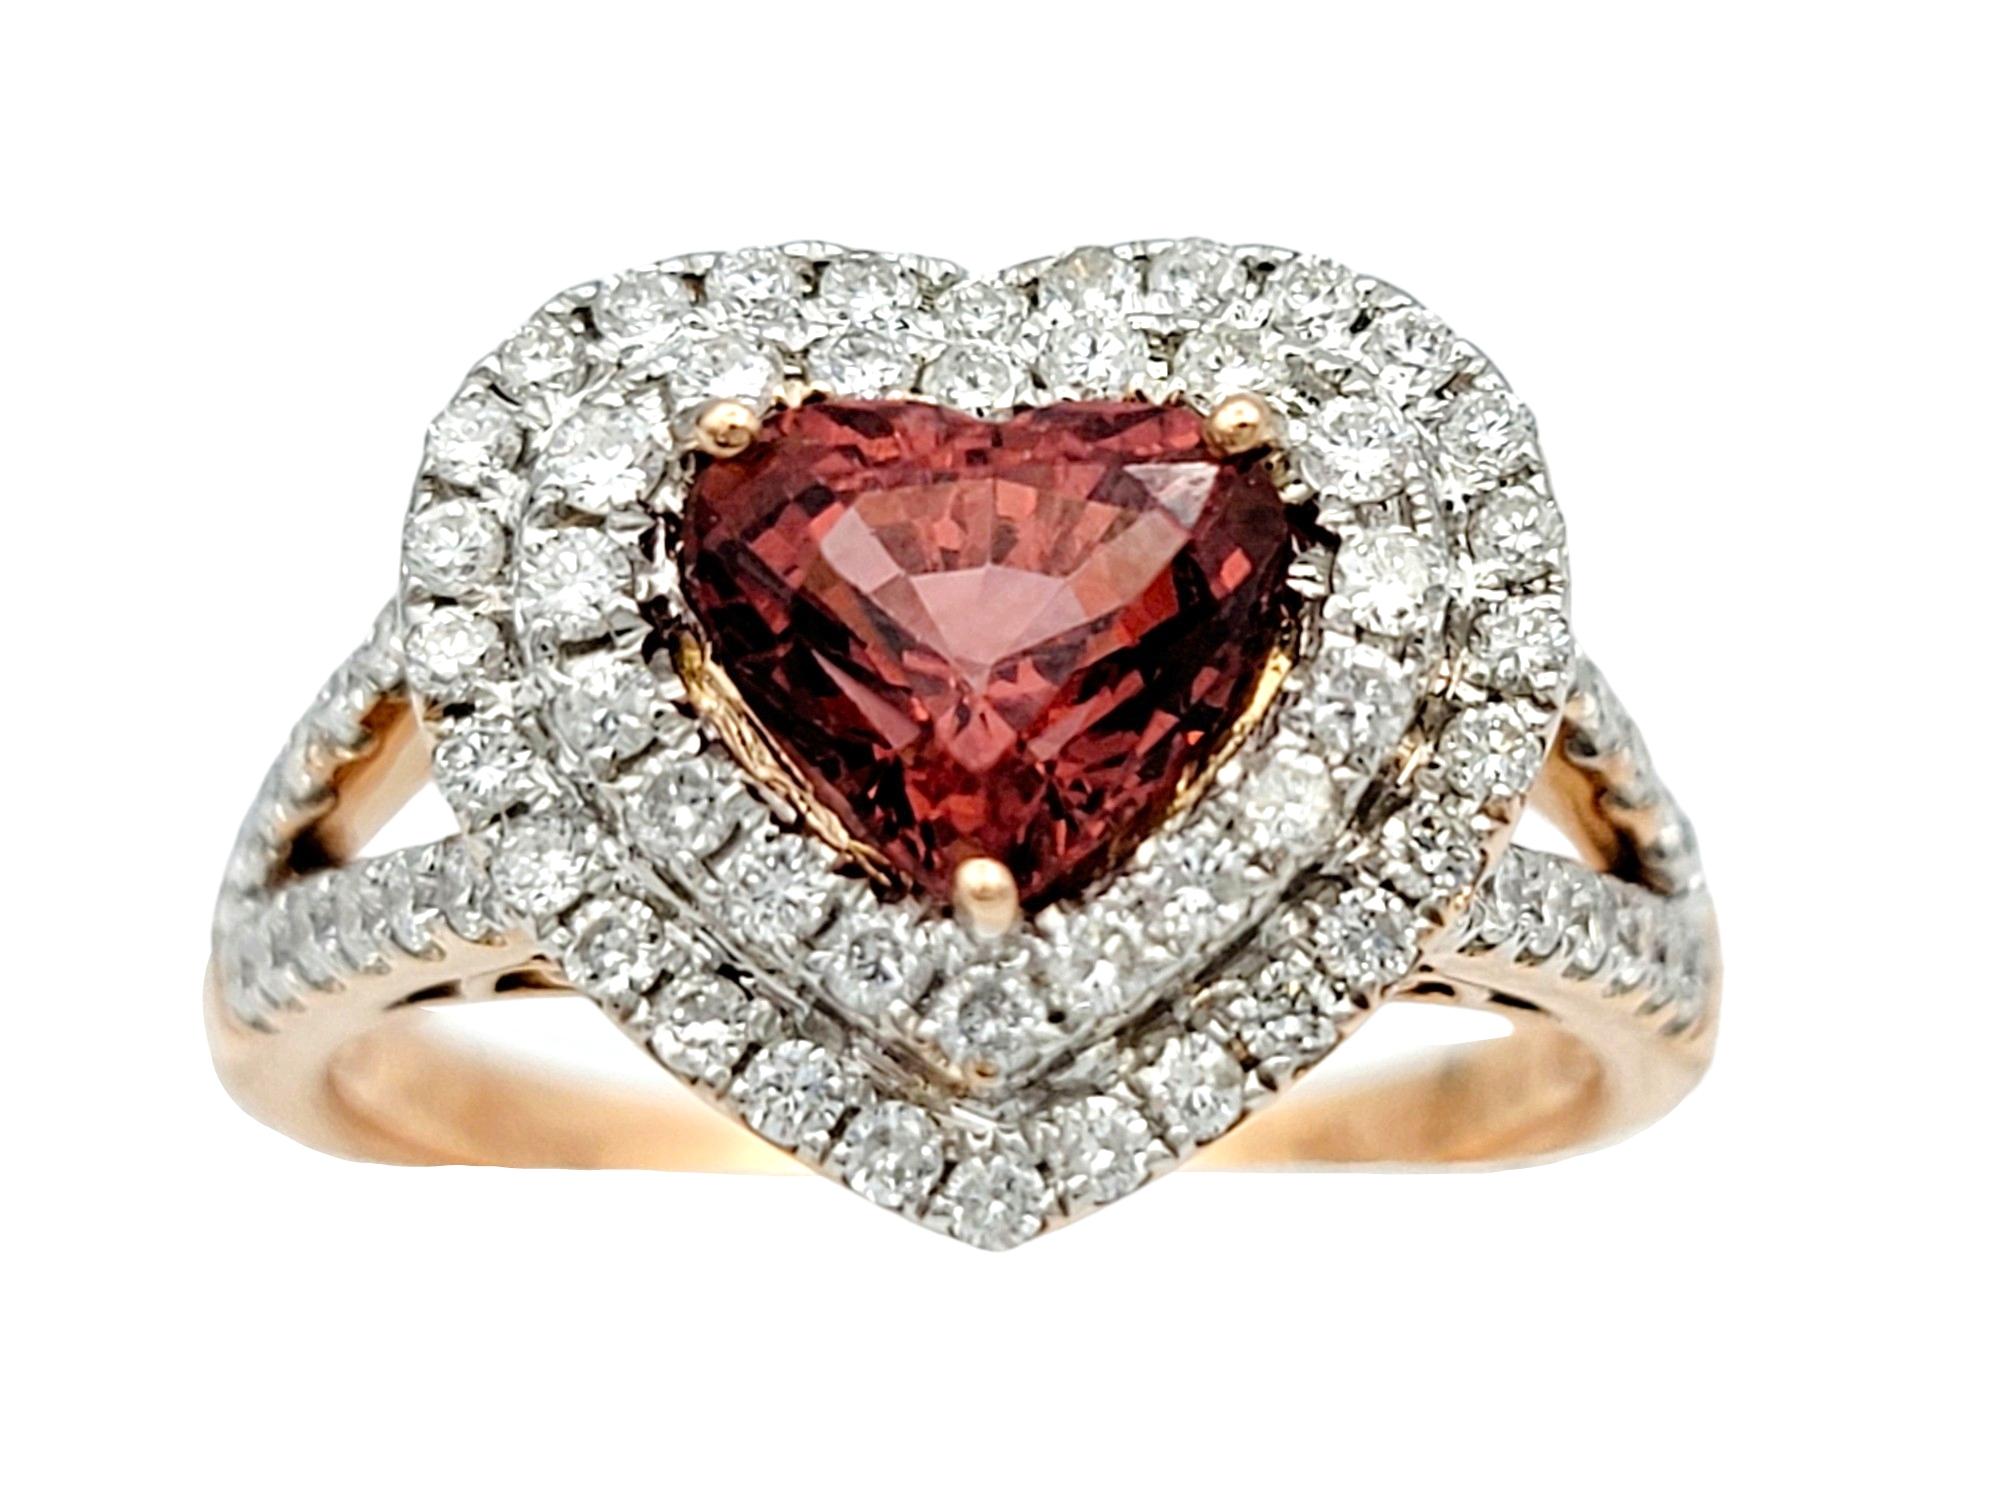 Ring Size: 7.25

This enchanting ring features a heart-shaped spinel as its focal point, exuding warmth and romance, set within lustrous 14 karat rose gold. The vivid brownish-red hue of the spinel is enhanced by a dazzling double halo of sparkling